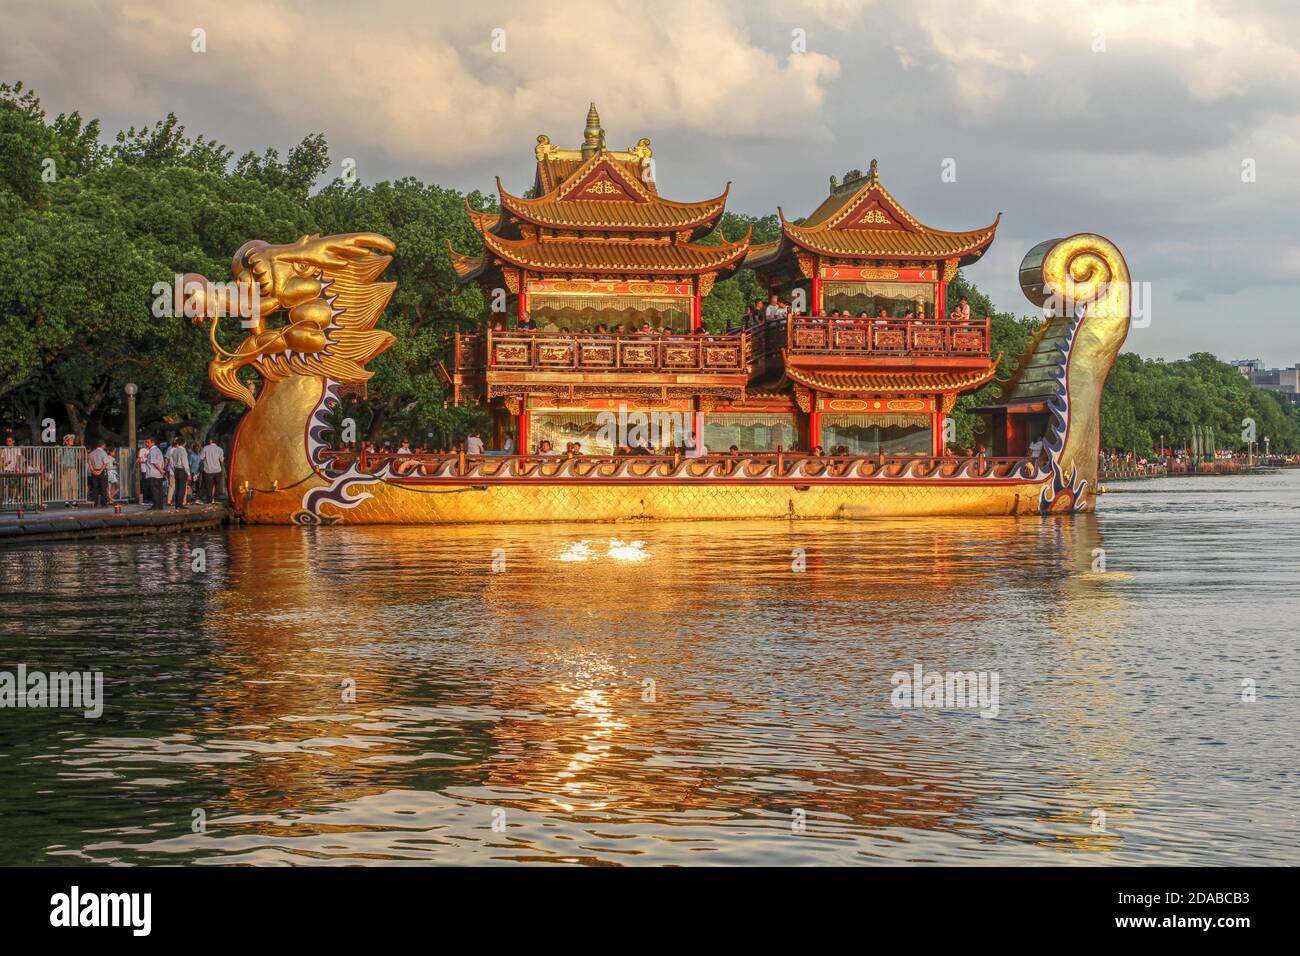 Elaborate touristic dragon boat on West Lake, Hangzhou, China at golden hour. Stock Photo